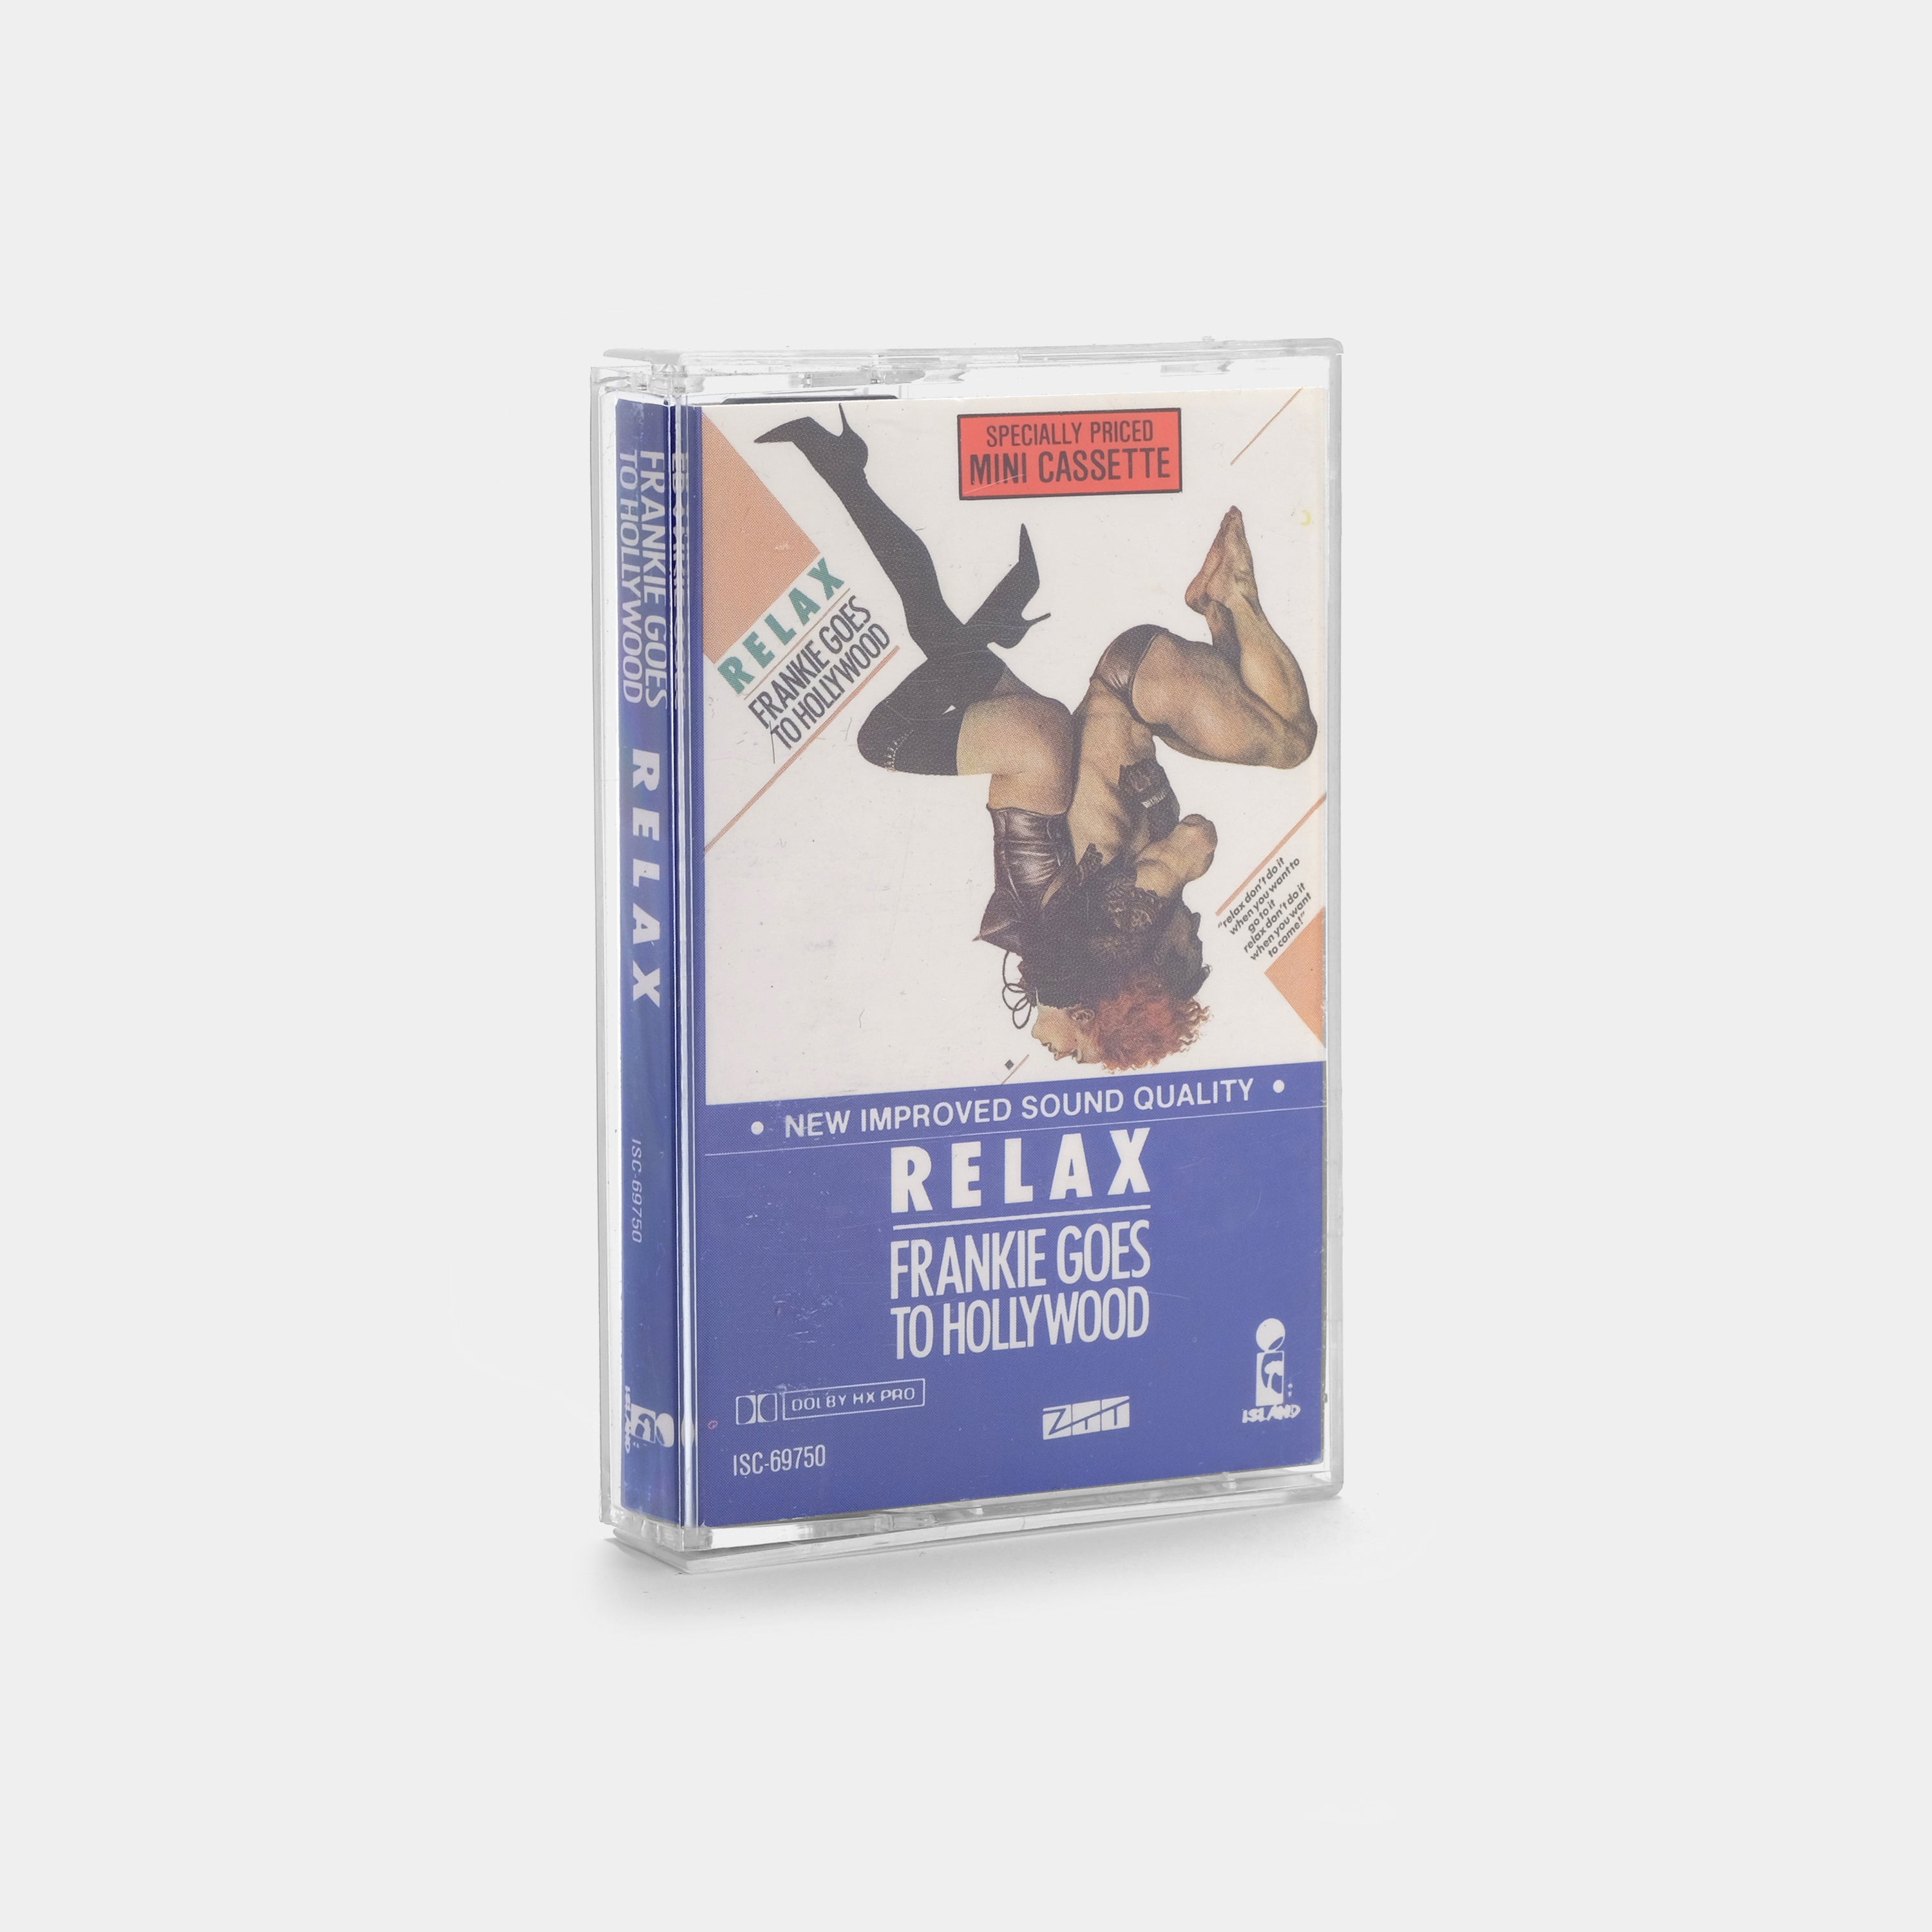 Frankie Goes To Hollywood - Relax Cassette Tape